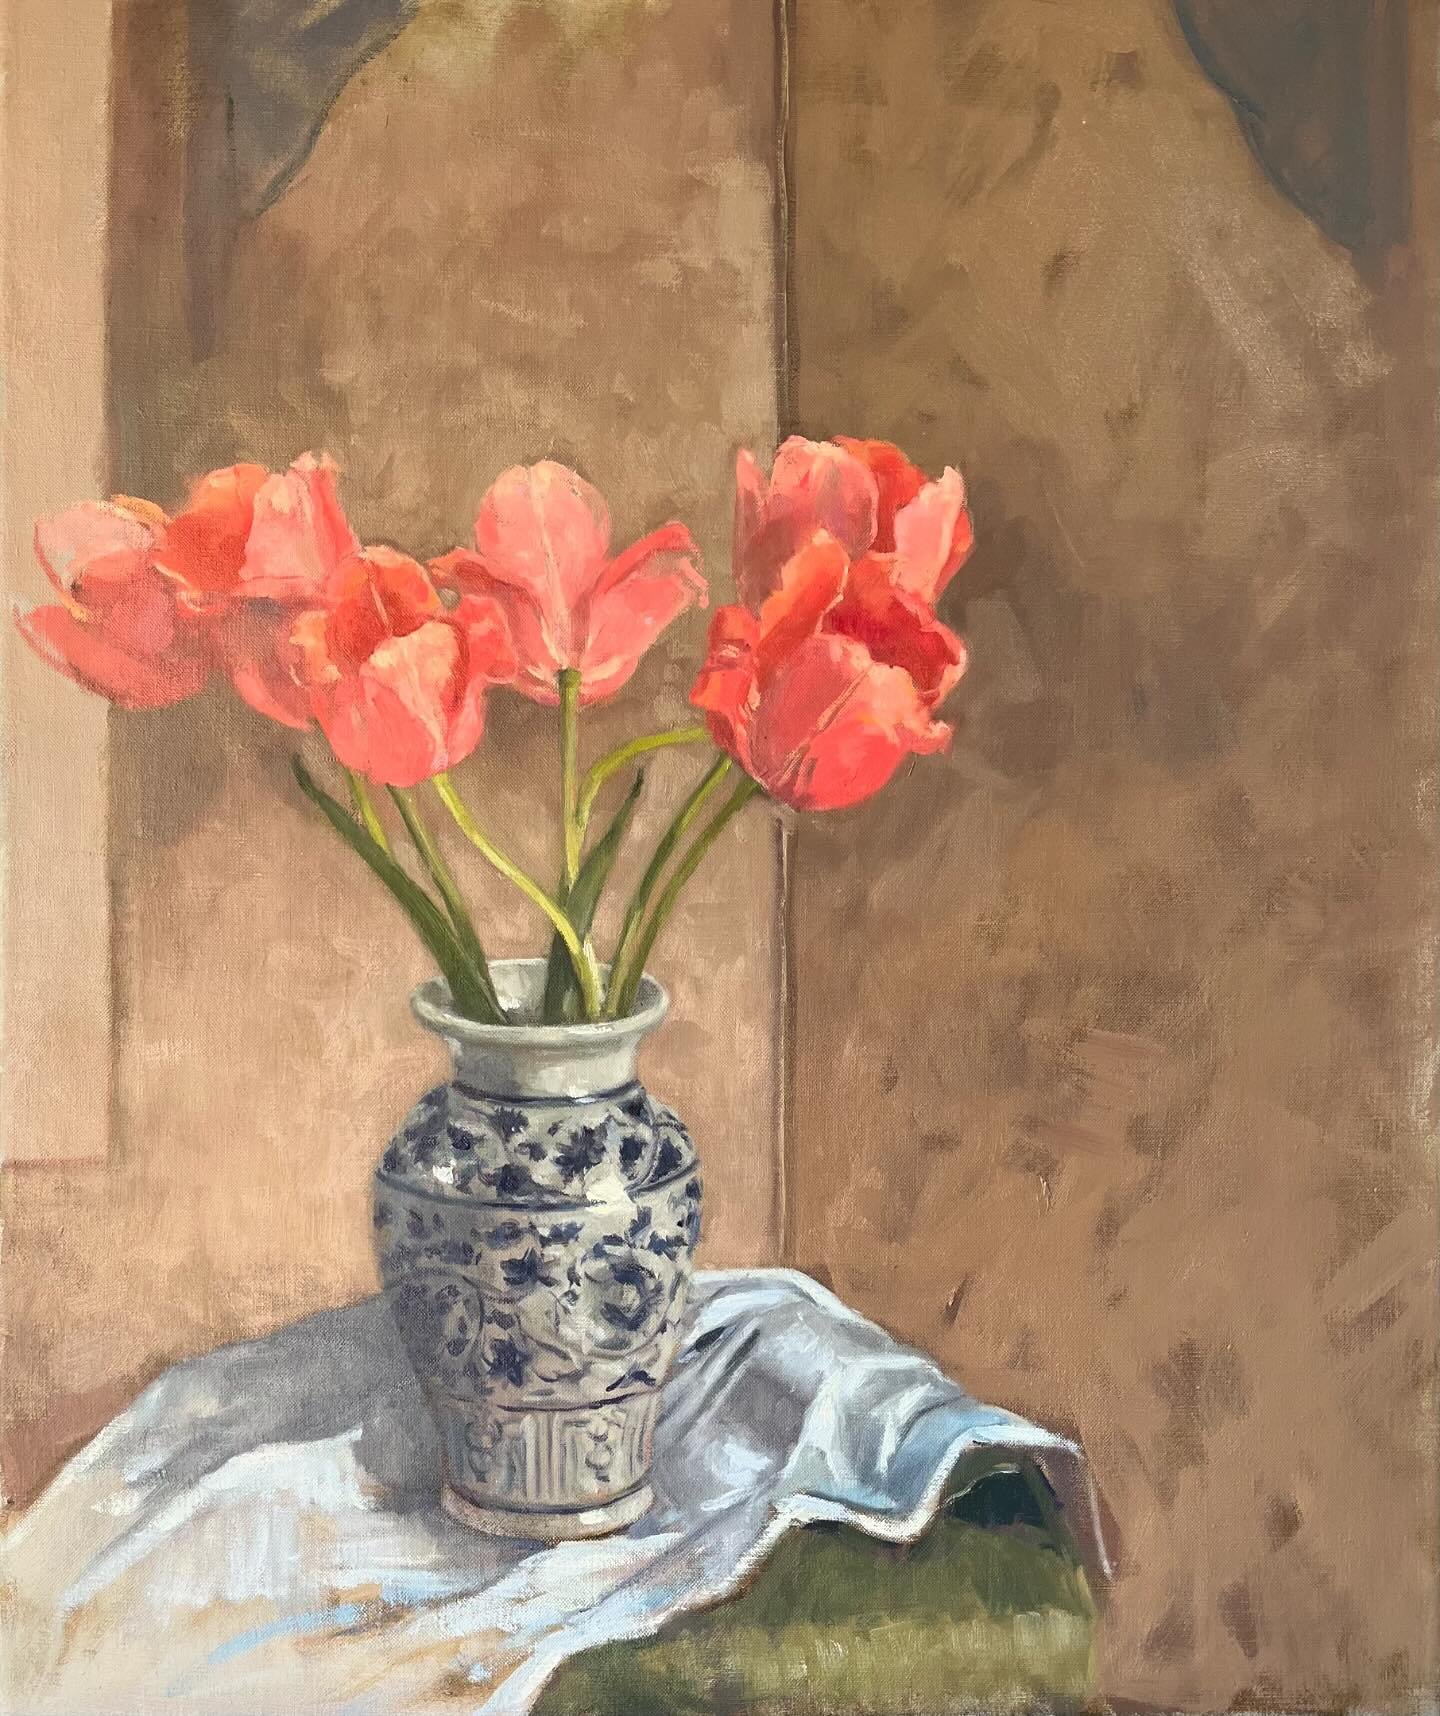 Pretty in Pink, Oil on canvas, 24 x 20 inches. Some beautiful pink tulips given to me for my birthday by my dear friend, Nicola. Bigger scale than my usual flower pictures. 

#pinktulips #tulips #blueandwhitevase #quickpainting #orange #pink #contemp